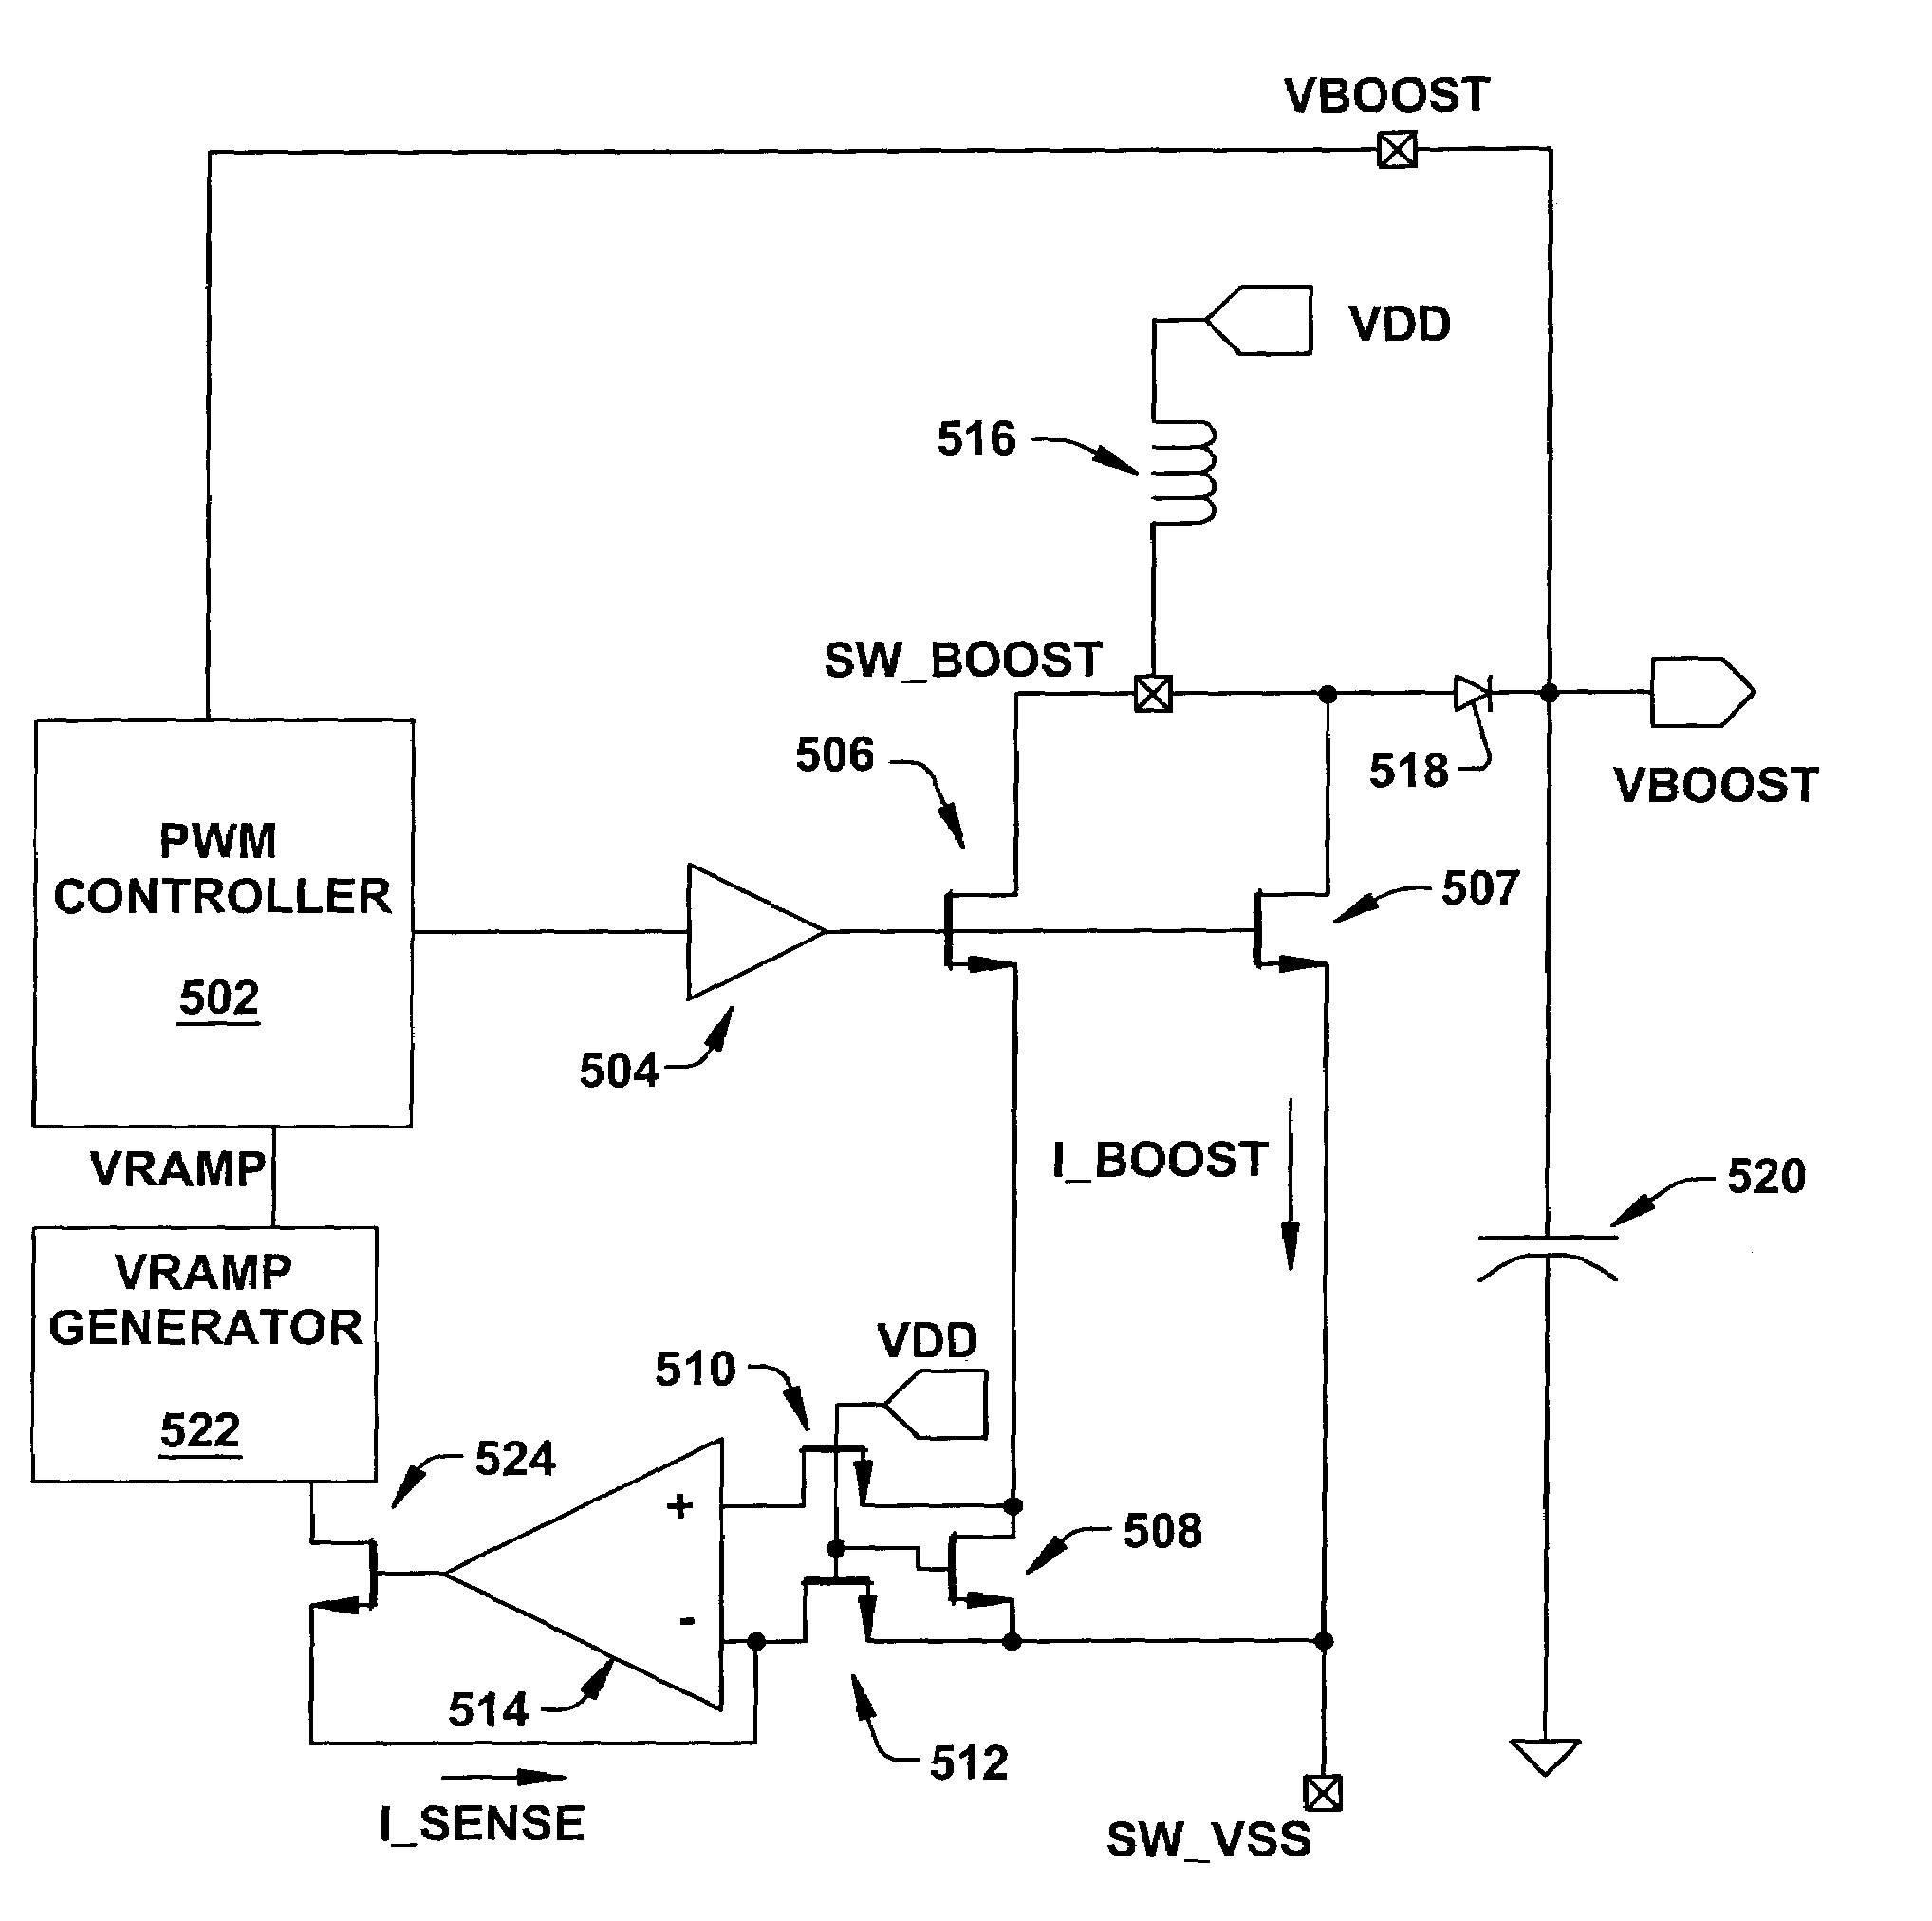 Current sensing circuitry for DC-DC converters